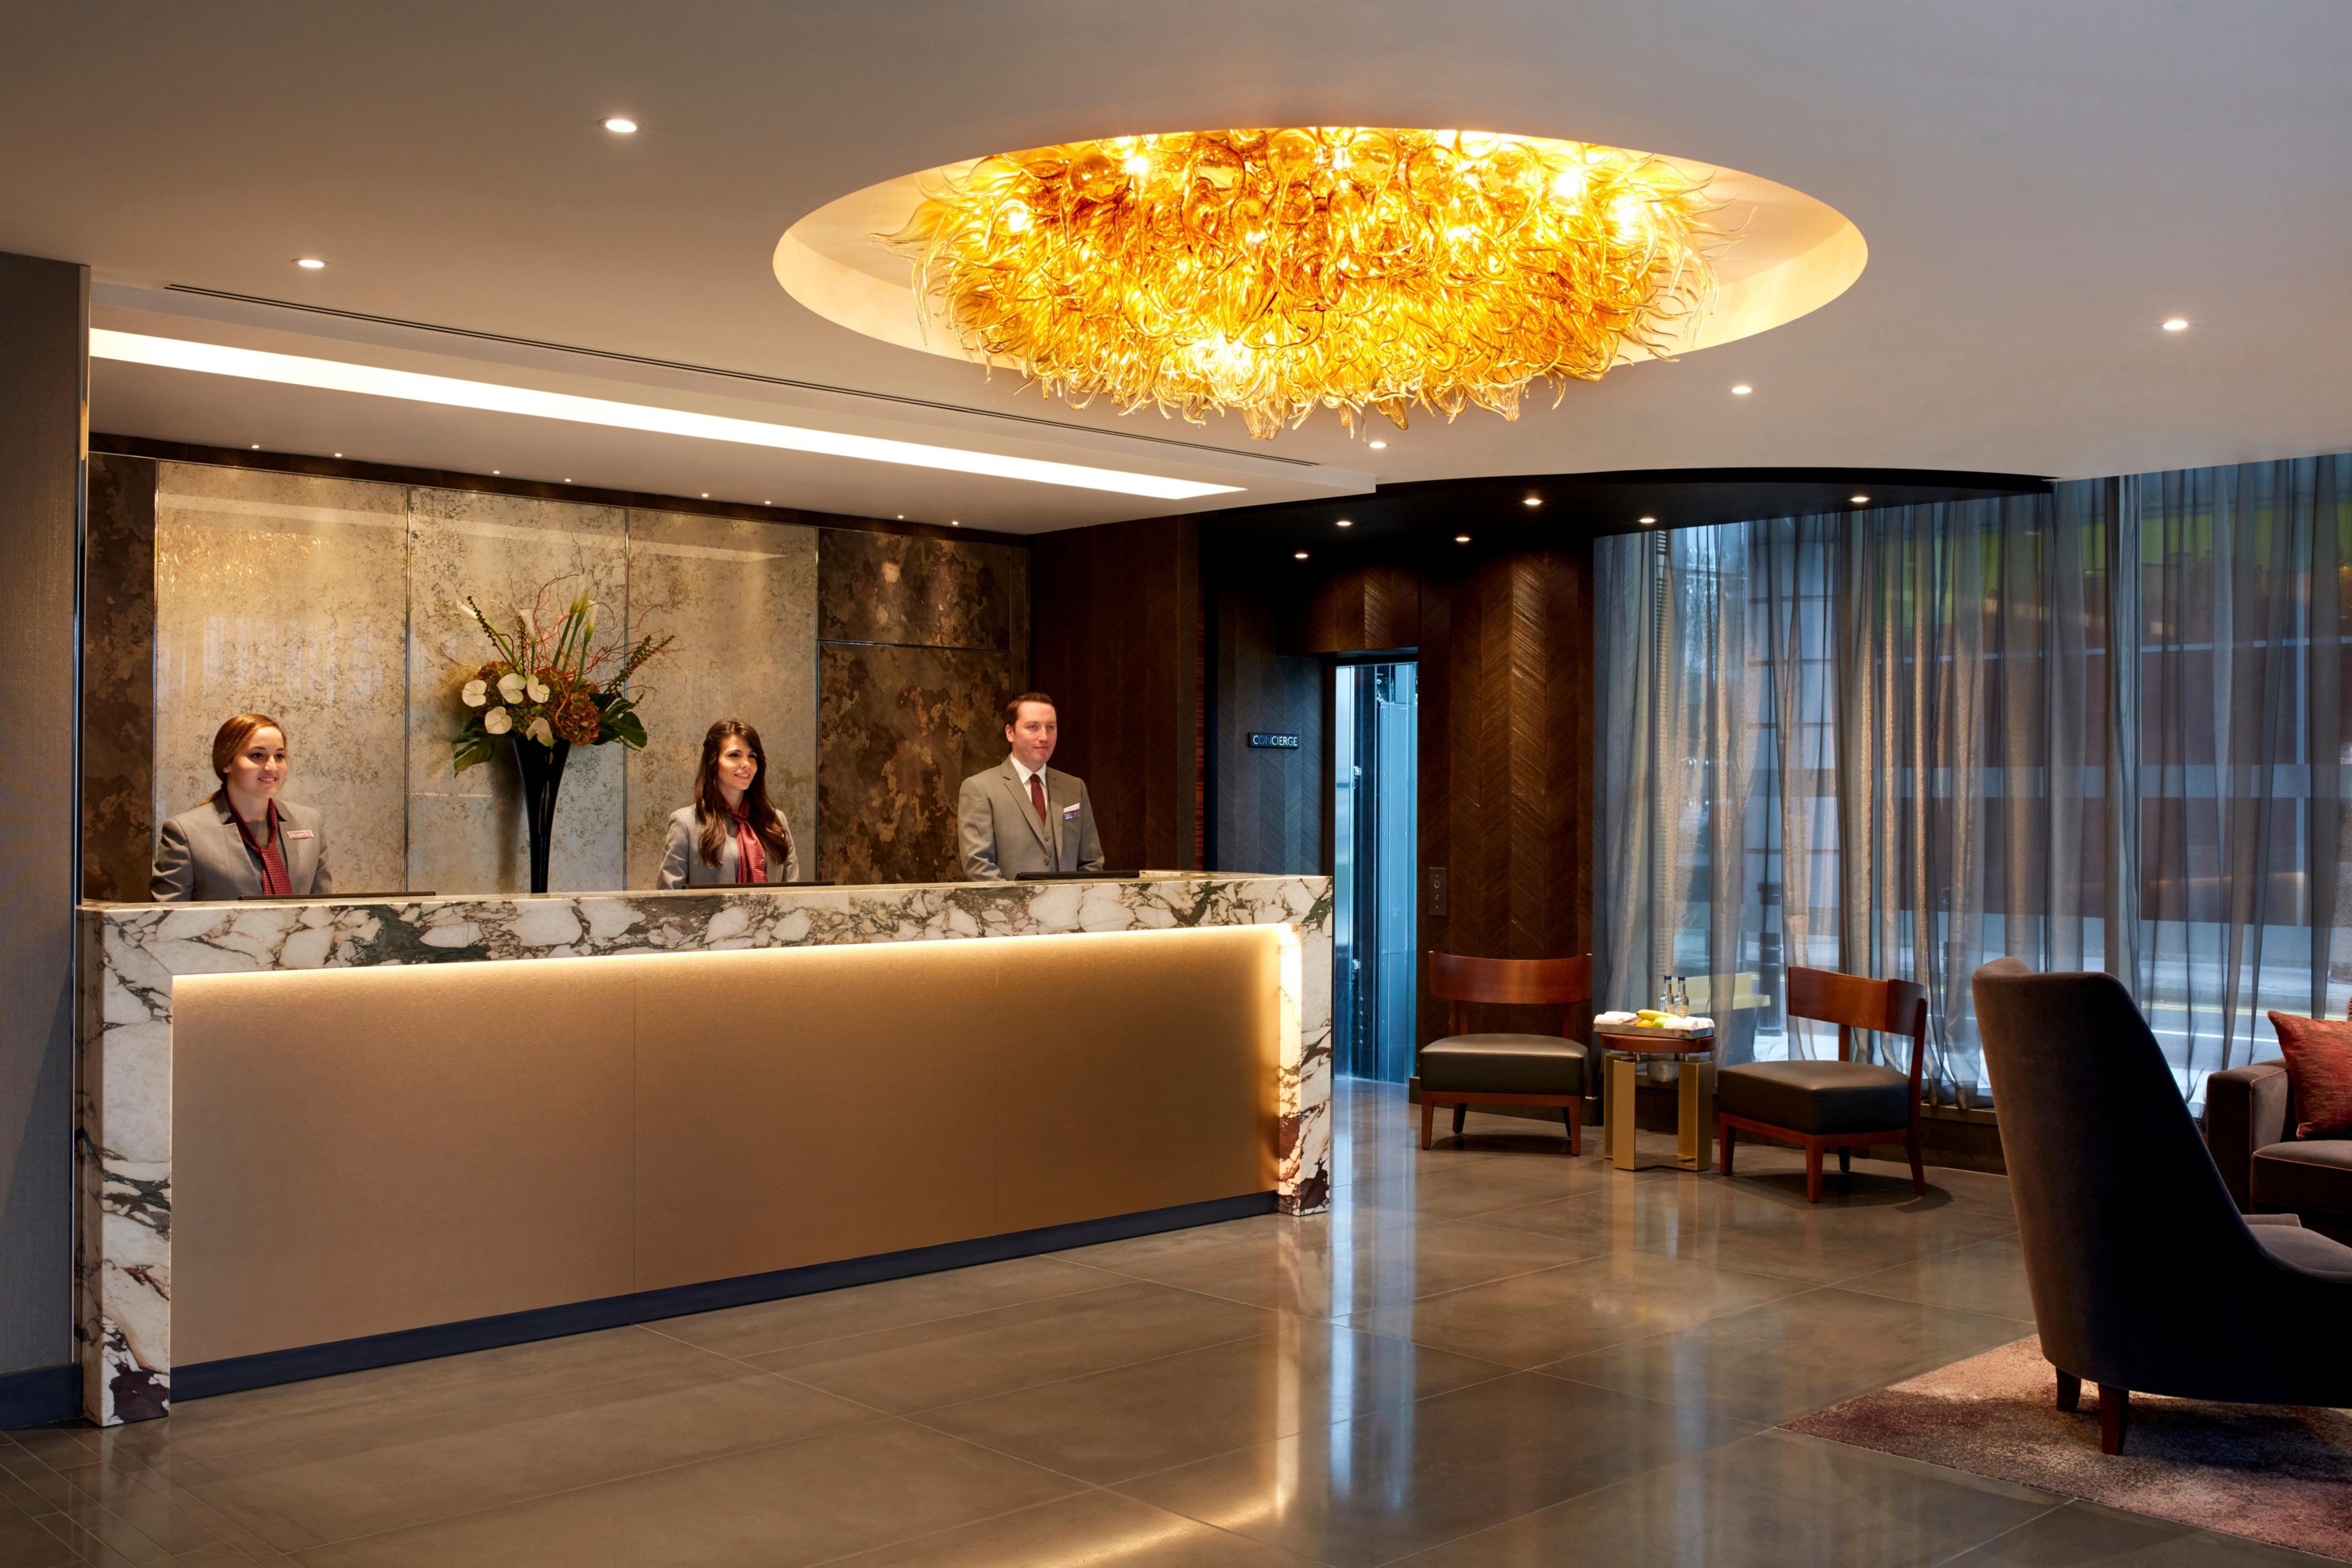 Our friendly FrontDesk team are on hand to help you with your stay